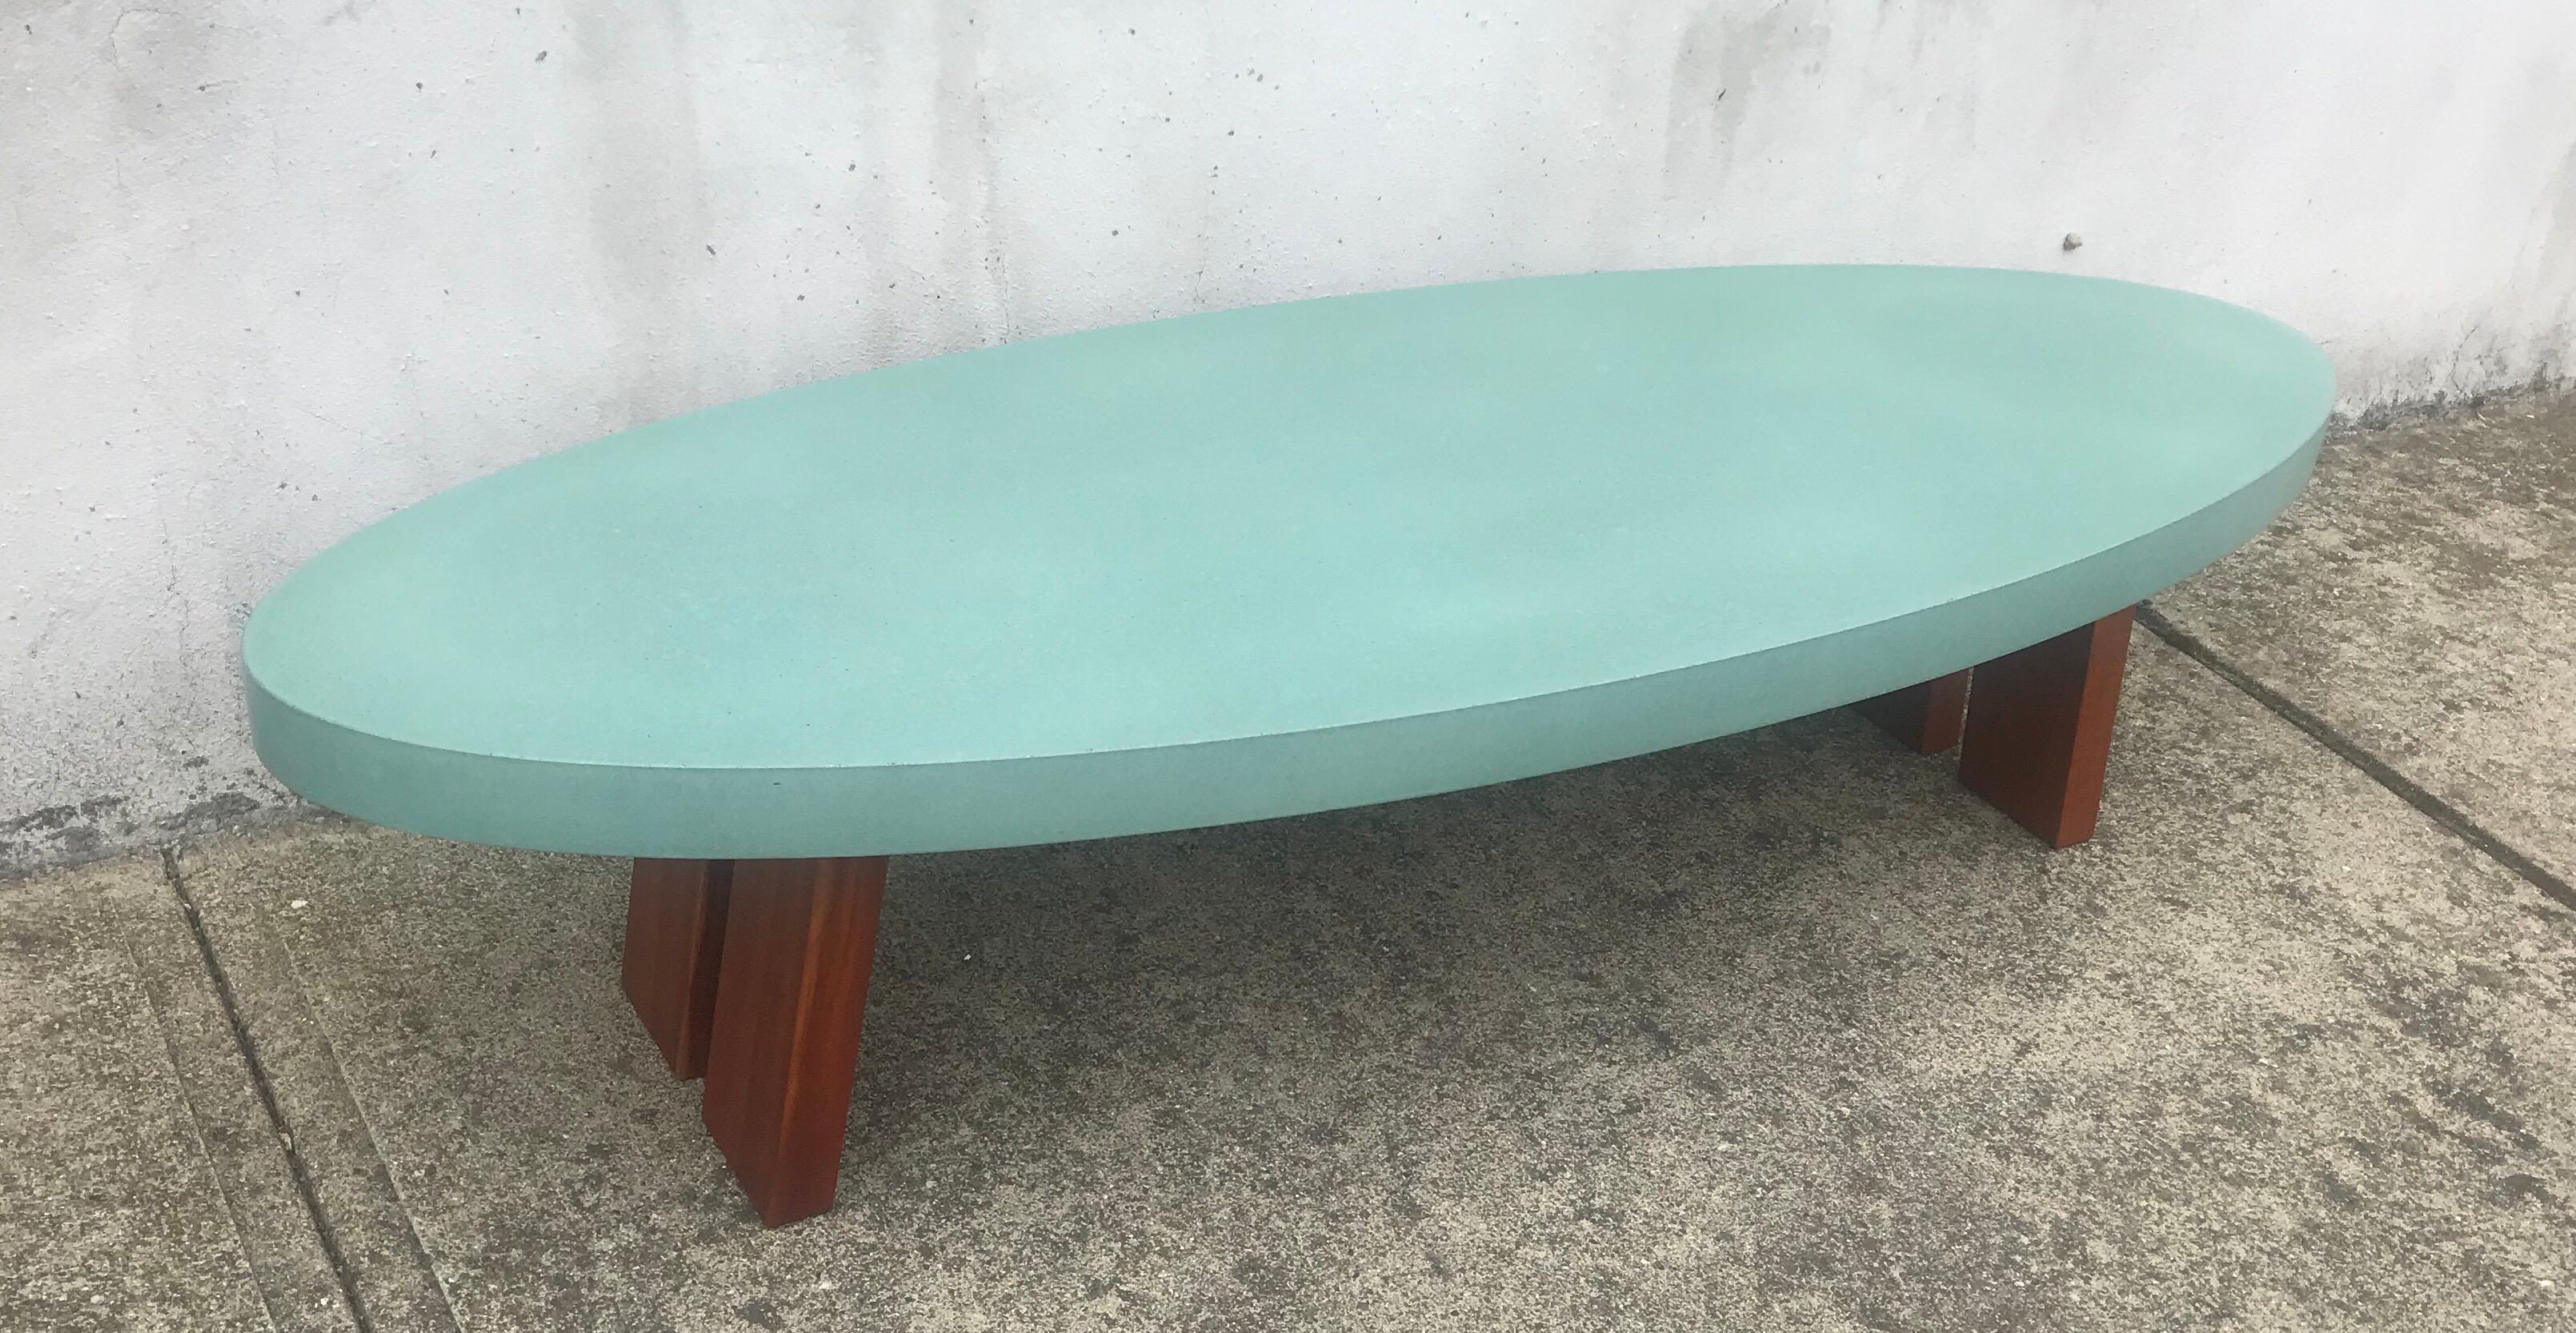 Very cool oval coffee table by a Peter Sandback, Memphis design in the style of Ettore Sottsass.  Thick composite top resting on solid walnut frame, early 2000’s, hallmarked.